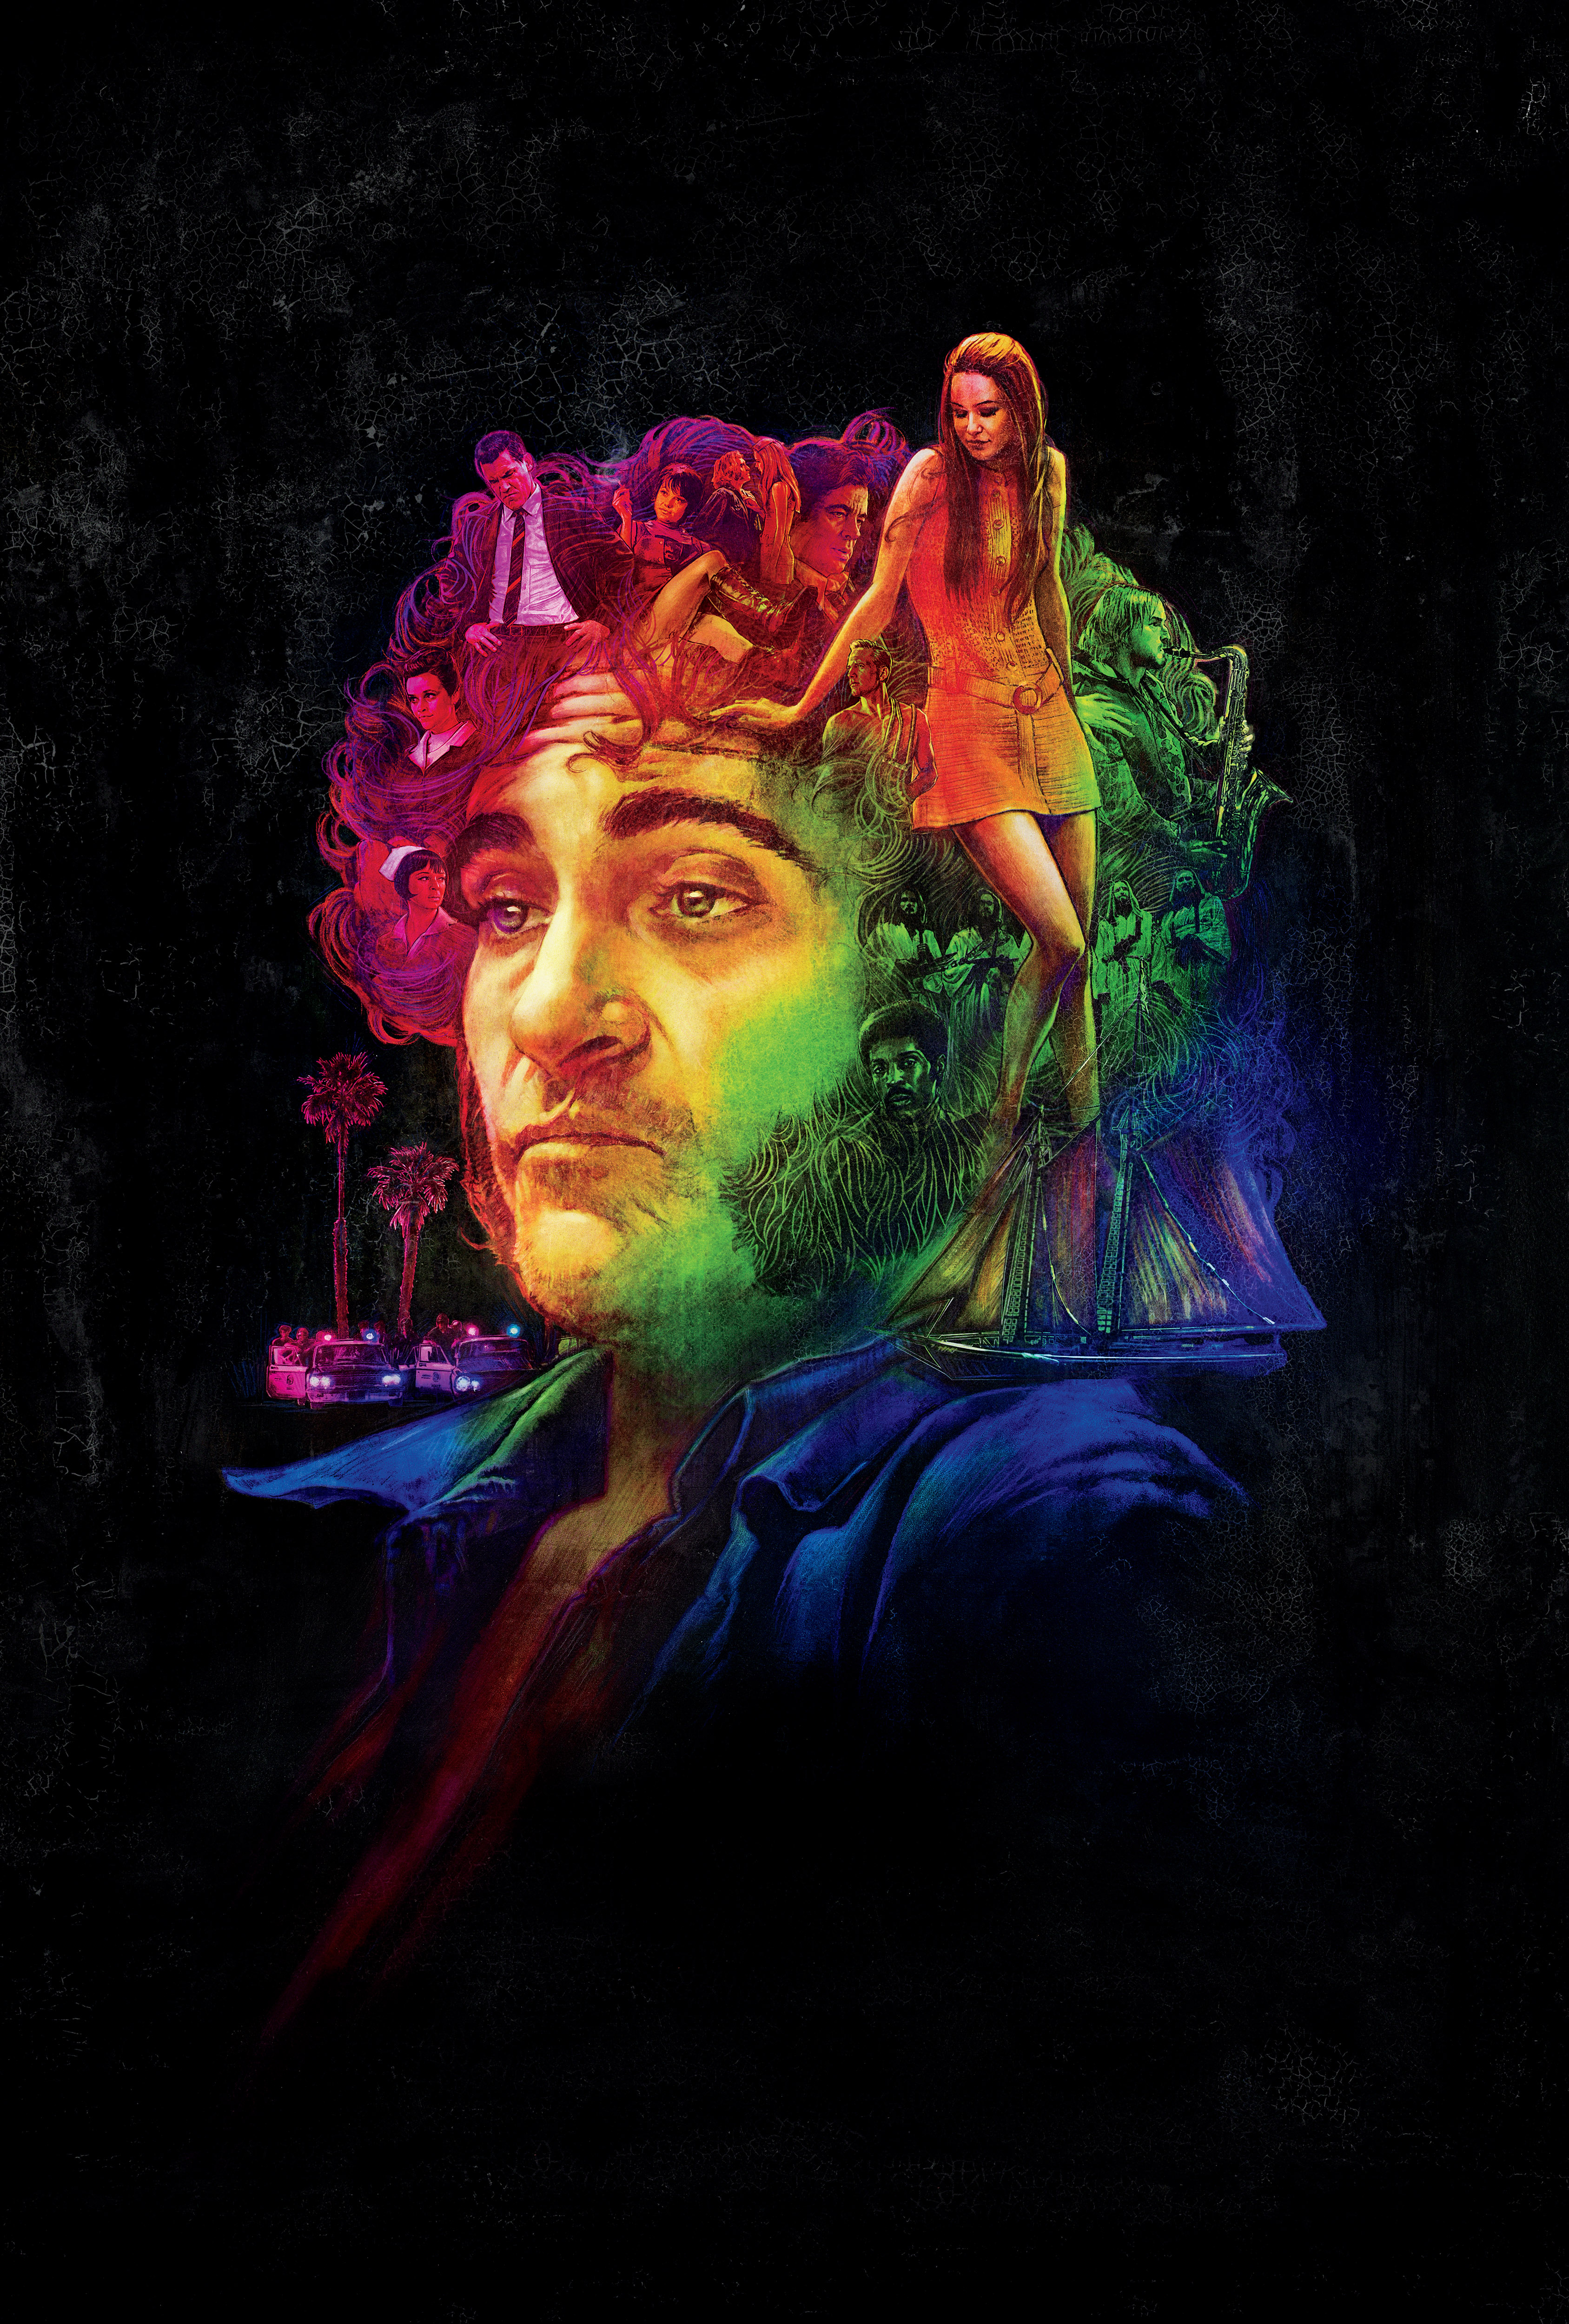 Inherent Vice Film Posters Joaquin Phoenix Katherine Waterston Psychedelic Colorful 3375x5000